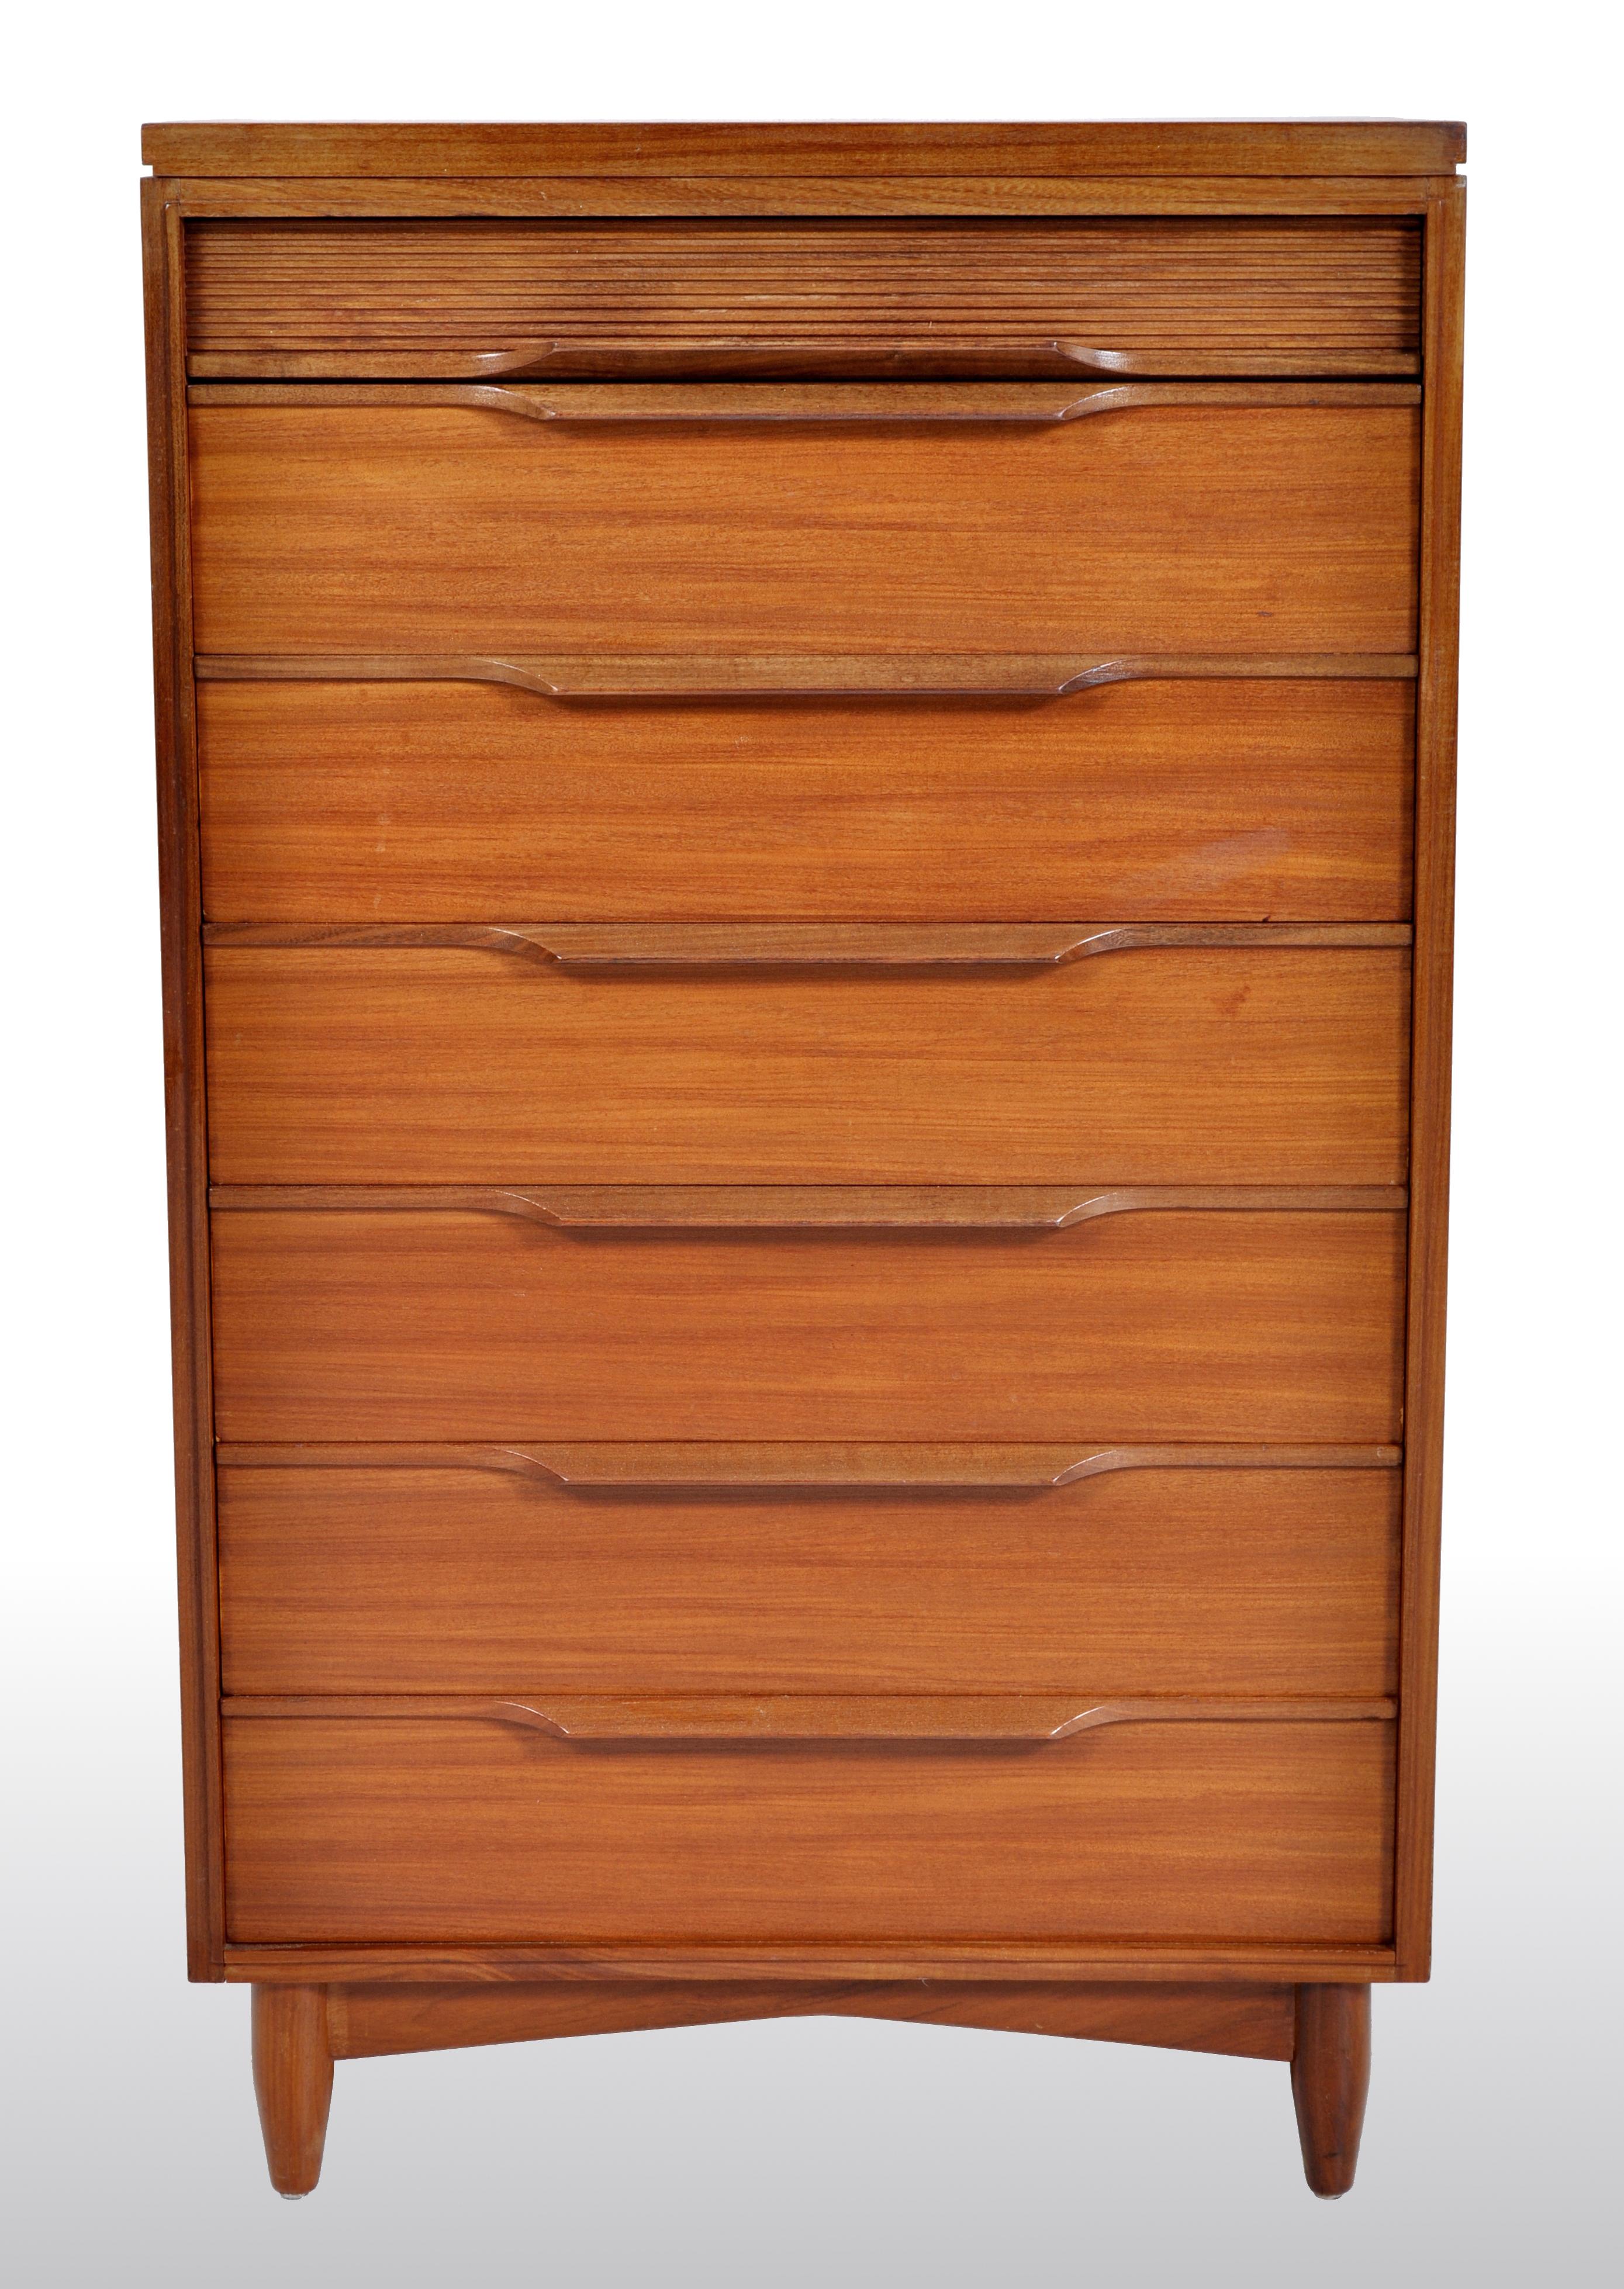 Mid-Century Modern Danish chest of drawers / dresser in teak, 1960s. The dresser being a semainier chest (having seven drawers), the top drawer having a ribbed design with six other drawers below. The chest raised on short tapering legs and joined